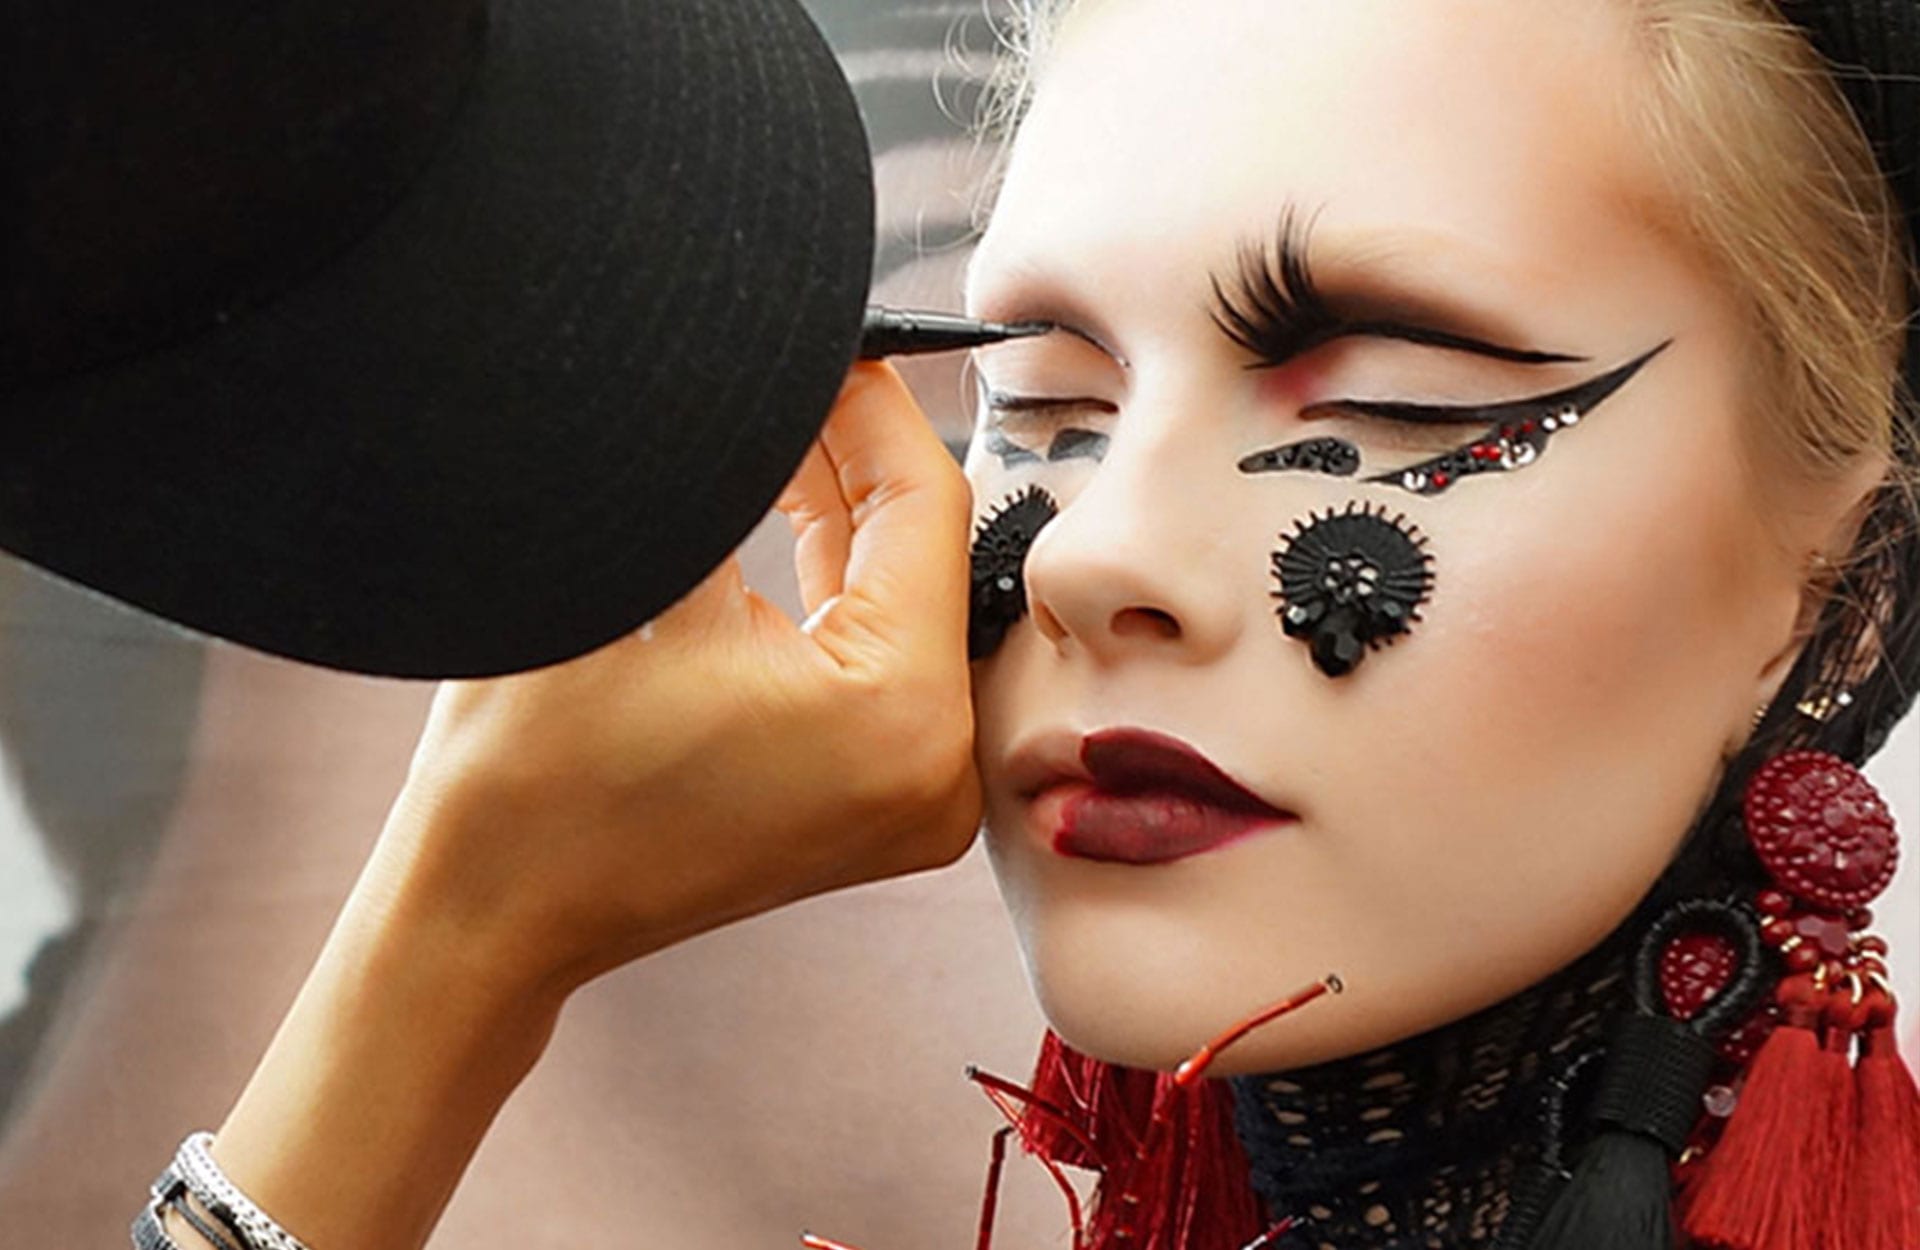 Vancouver is the Centre of the Fashion World for Makeup Grad-turned-Instructor Jon Hennessey